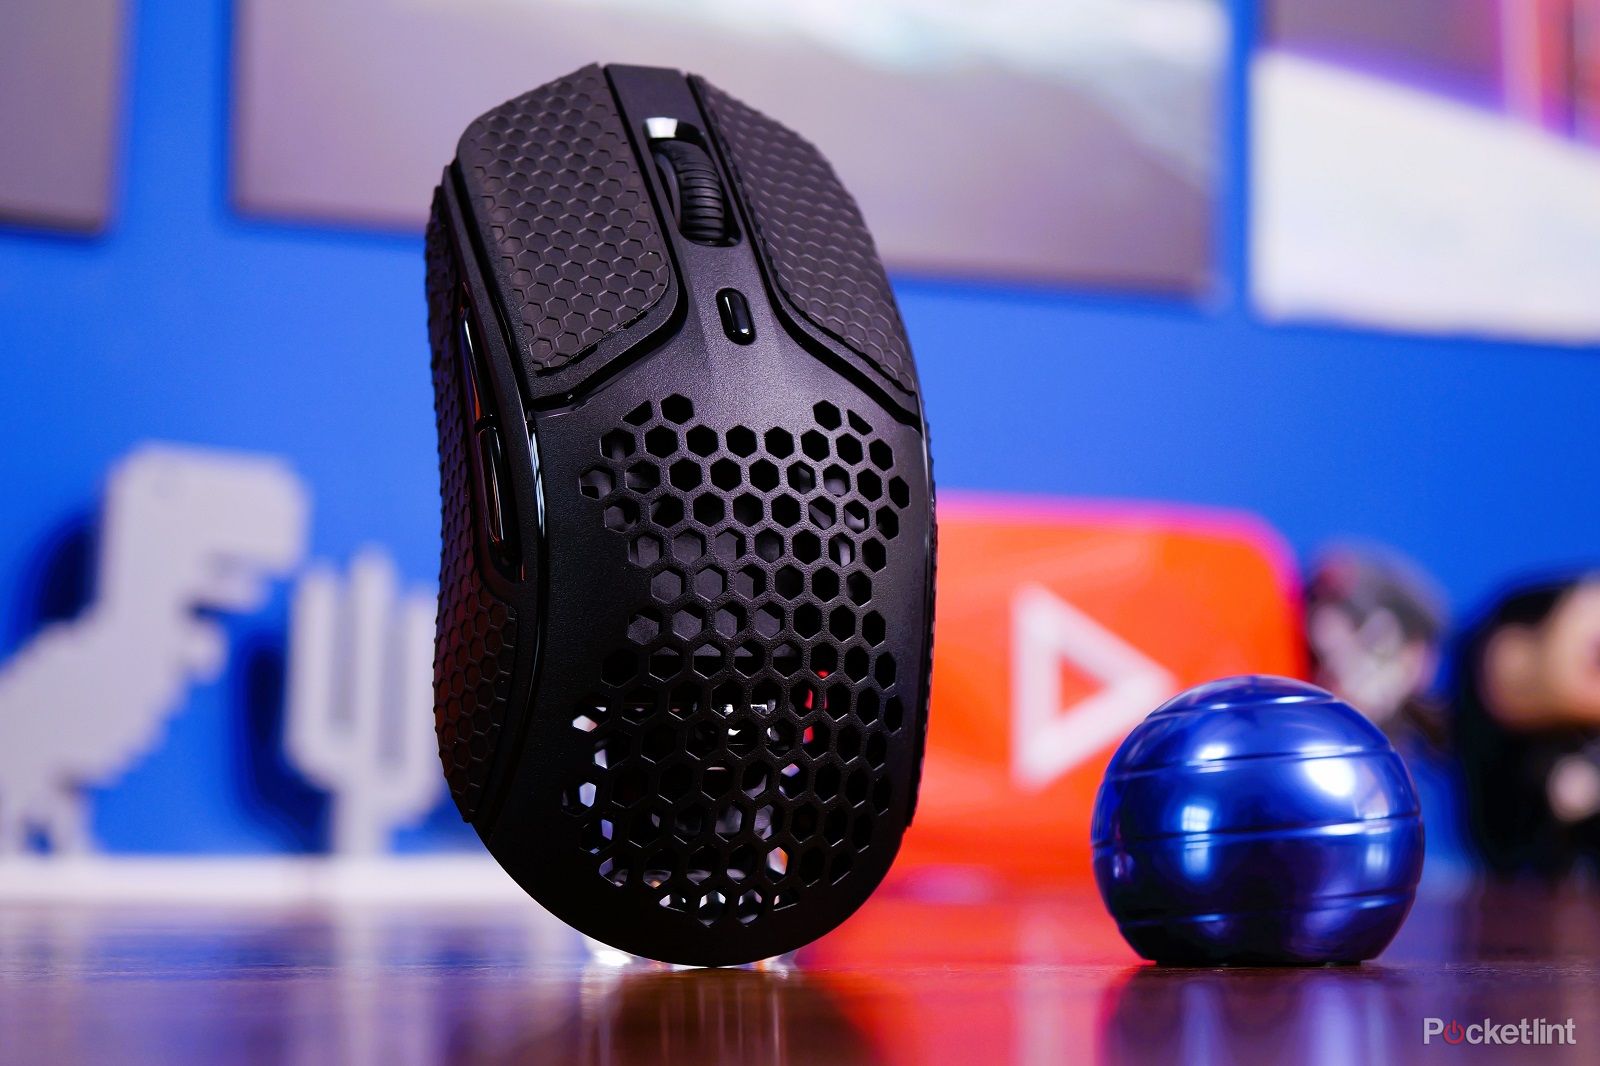 HyperX Pulsefire Haste Wireless gaming mouse review photo 12